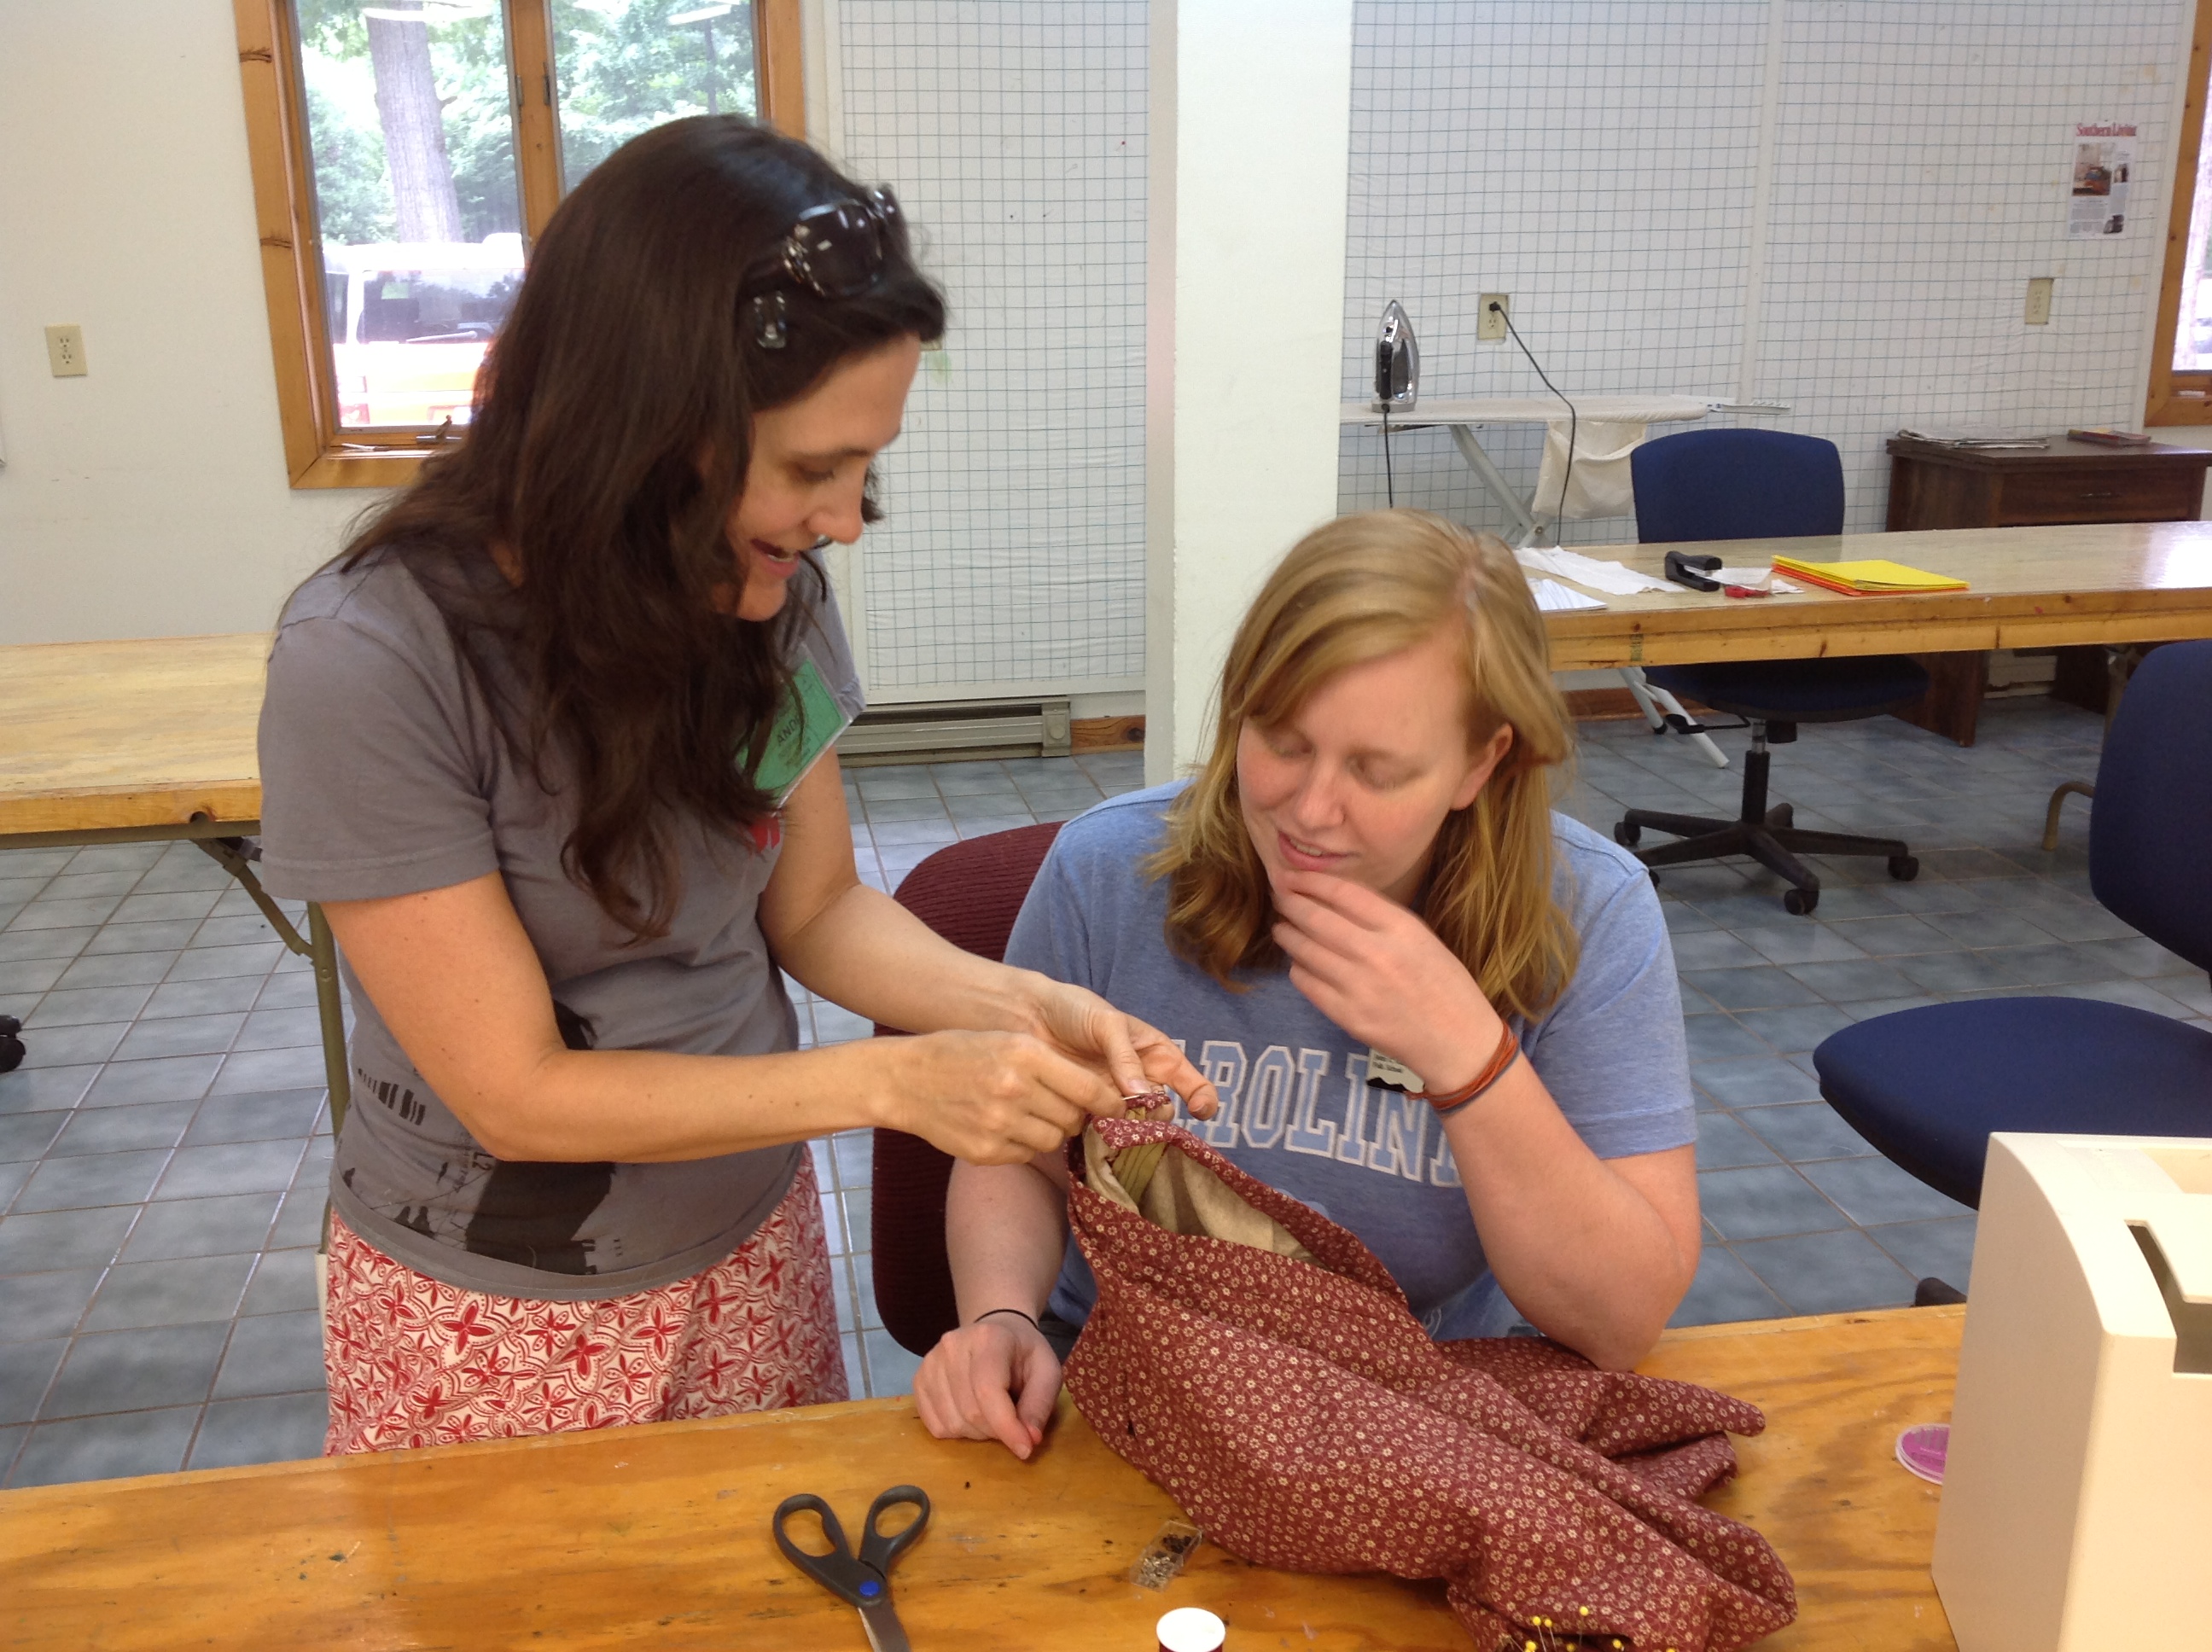 Building Your Sewing Skills at the John C. Campbell Folk School